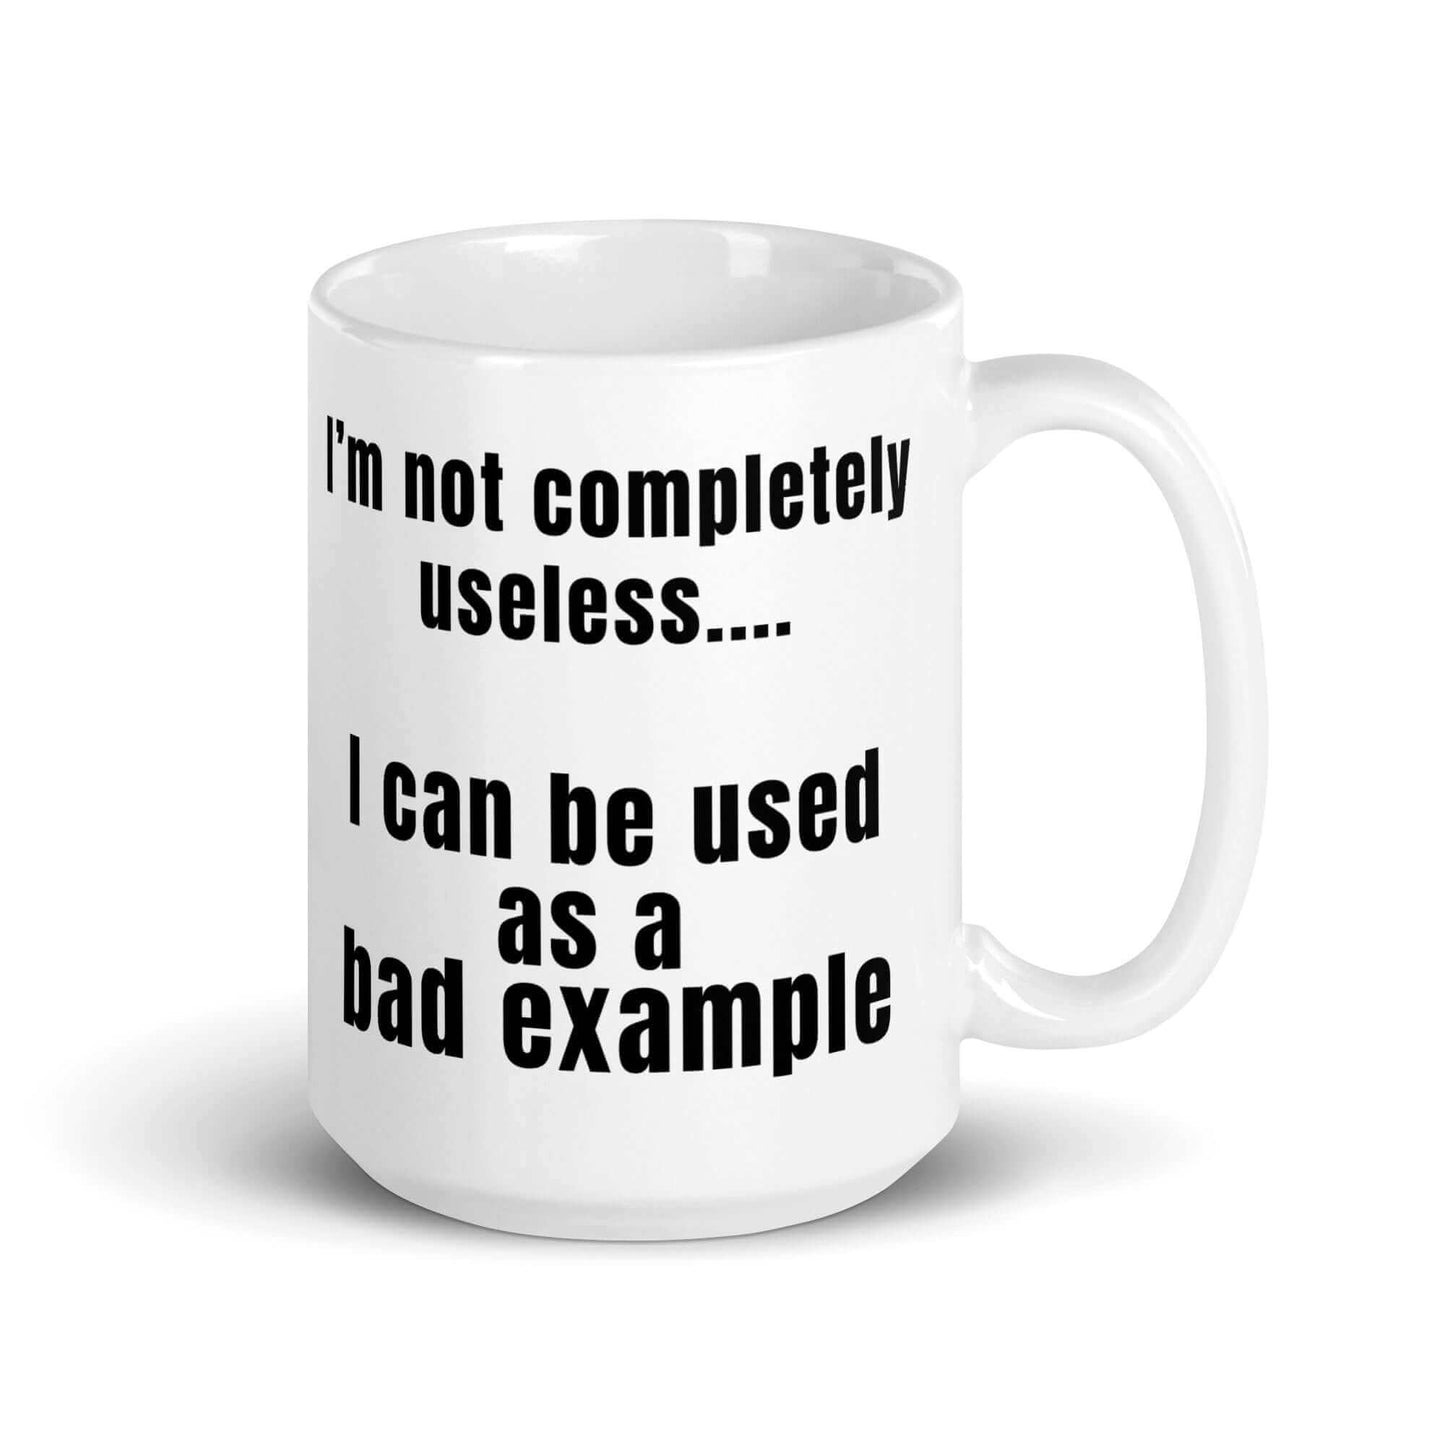 I'm not completely useless.... I can be used as a bad example - White glossy mug bad example coffee mug dads day fathers day funny mug gift for dad gift for him gift for mom useless